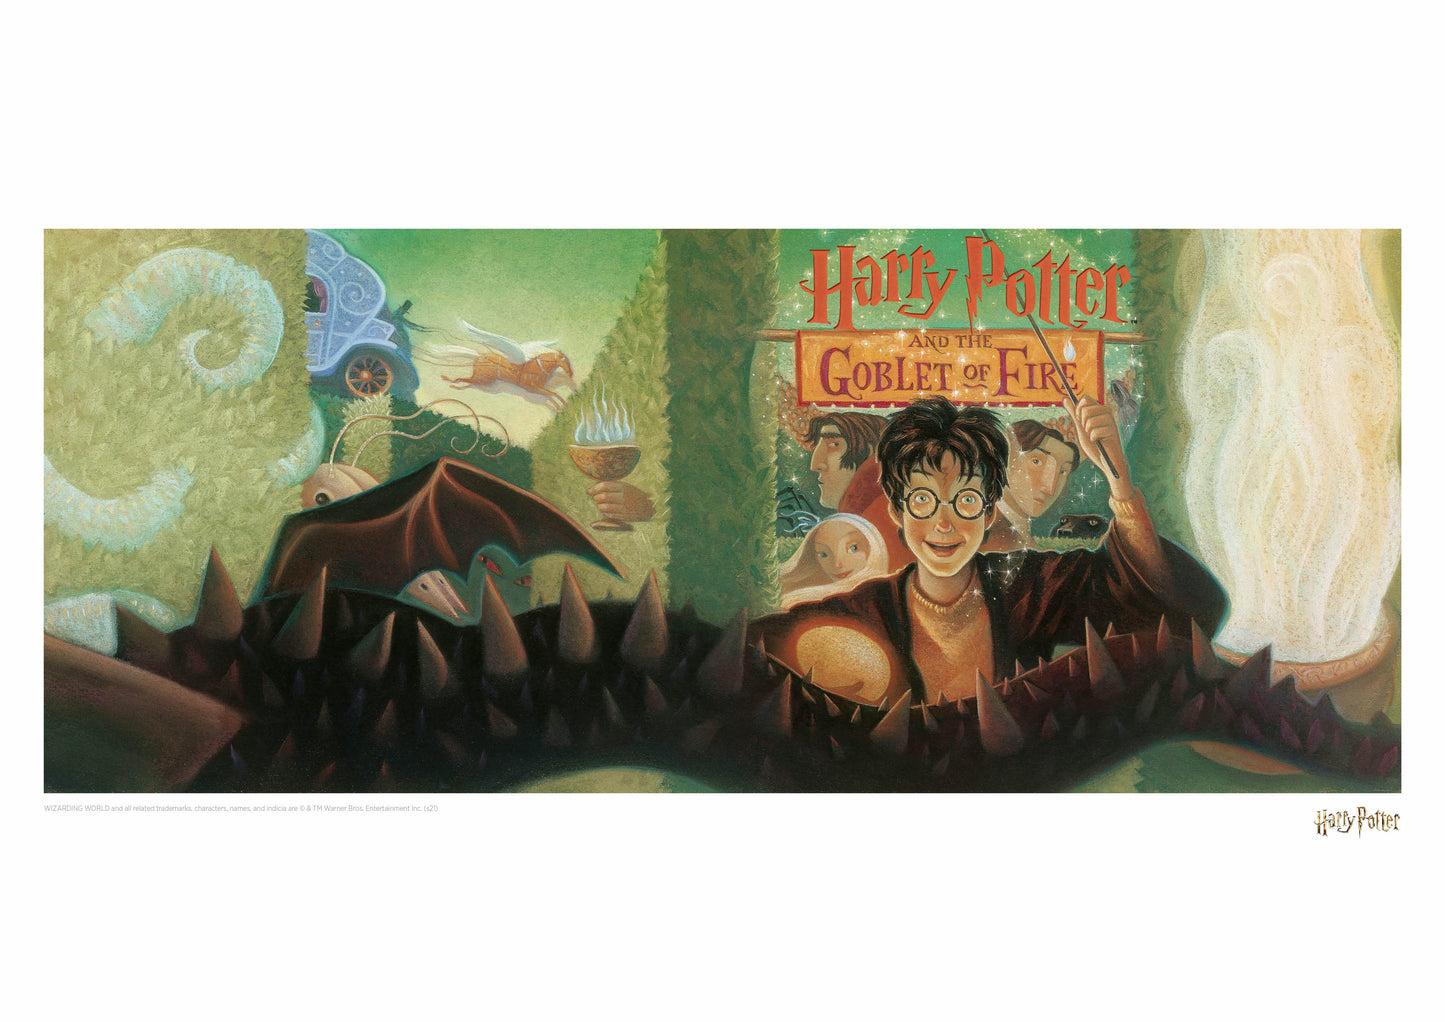 Harry Potter Book Cover - The Goblet of Fire Artwork